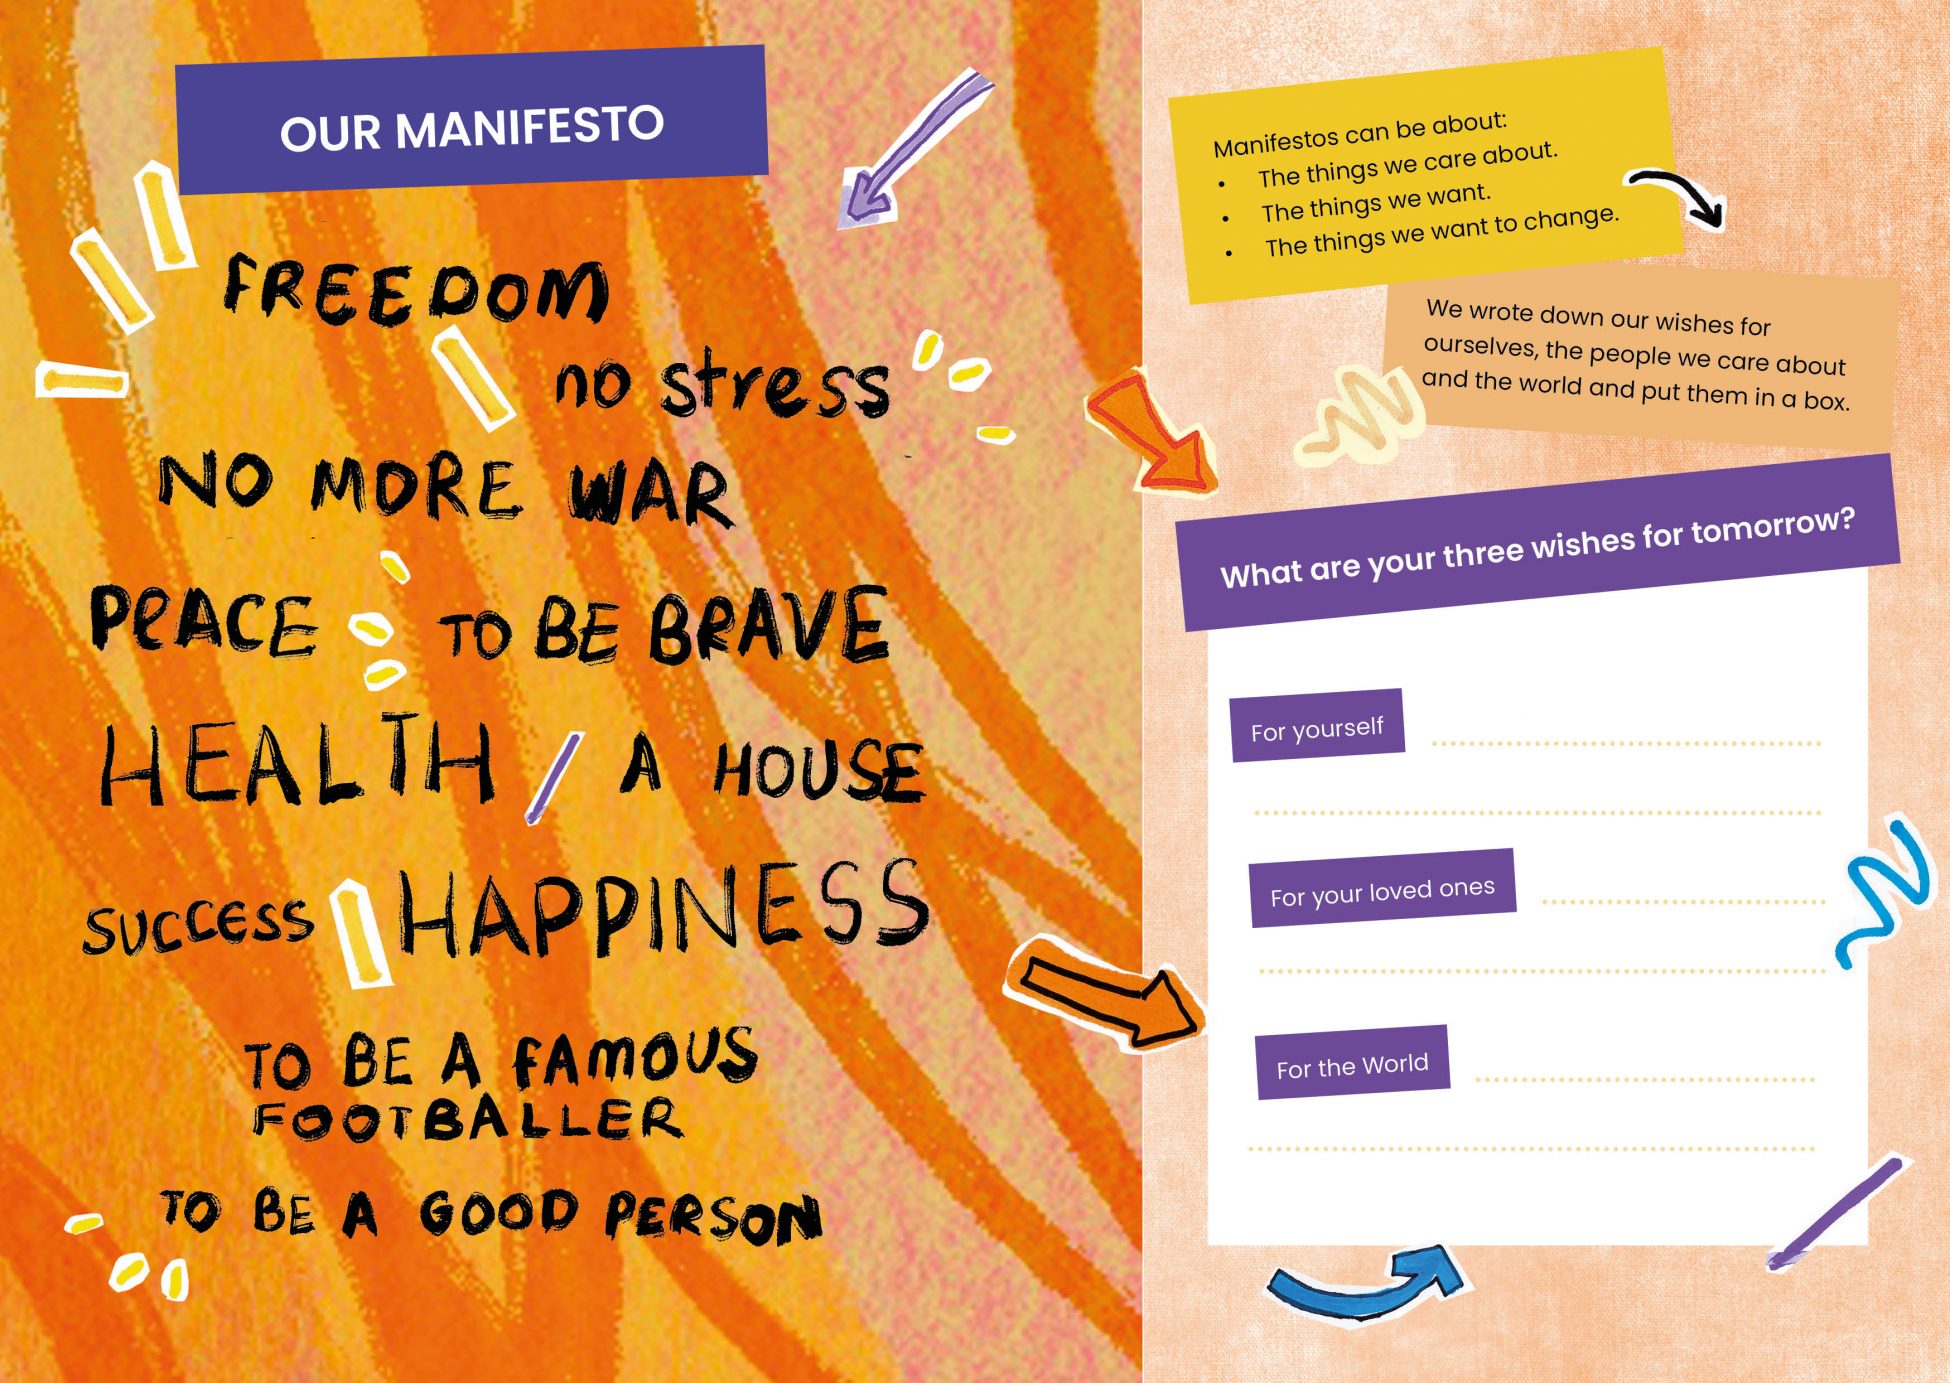 Pages 3 and 4 of the Futures of Care Manifesto. On the left is the manifesto itself: Freedom, no stress, no more war, peace, to be brave, health, a house, success, happiness, to be a famous footballer, to be a good person. On the right the reader is prompted to write down 3 wishes, one for themselves, one for their loved ones, and one for the world.